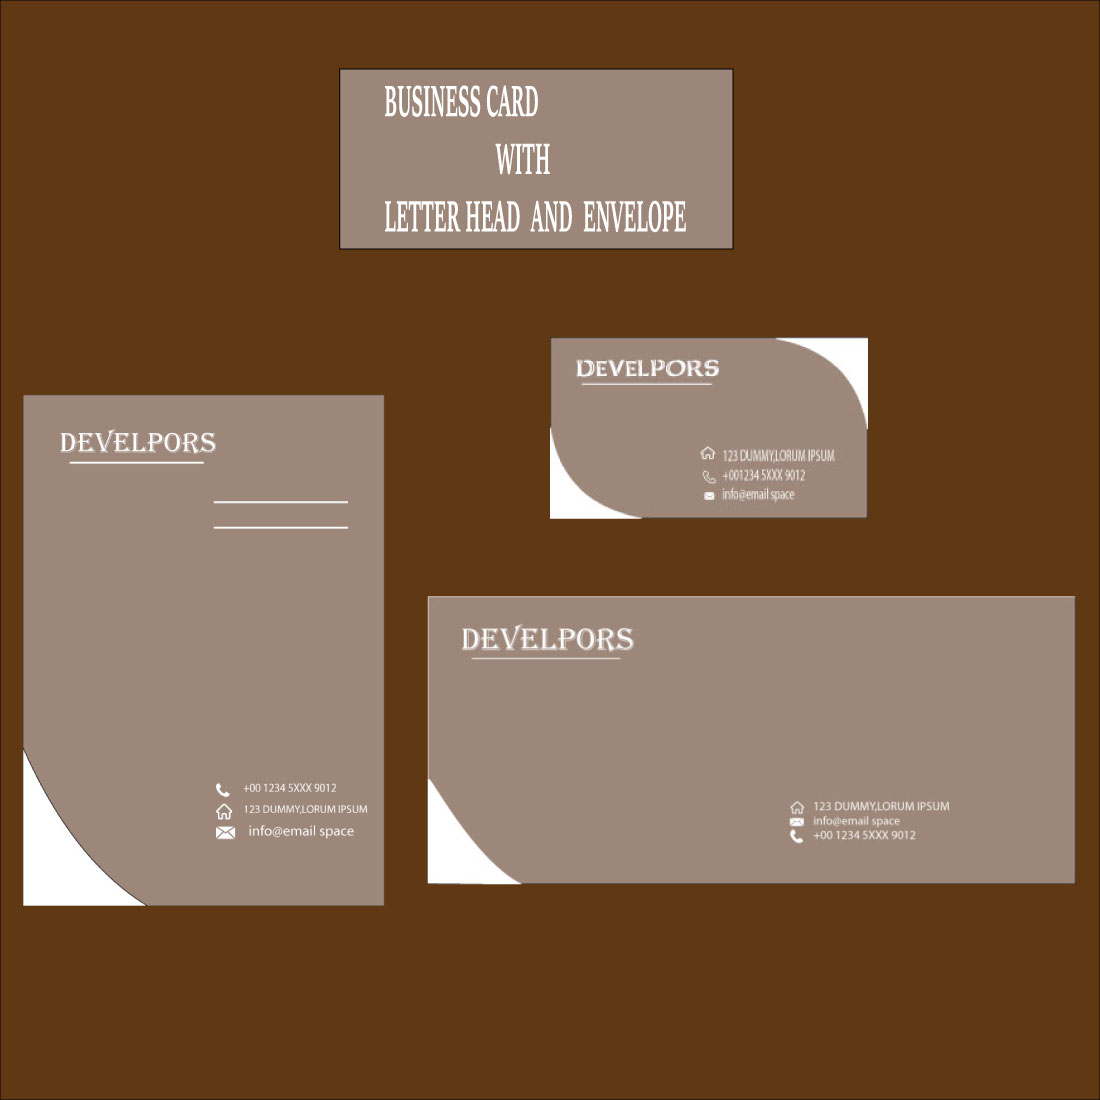 Business Card Design with Letter Head and Envelope cover image.